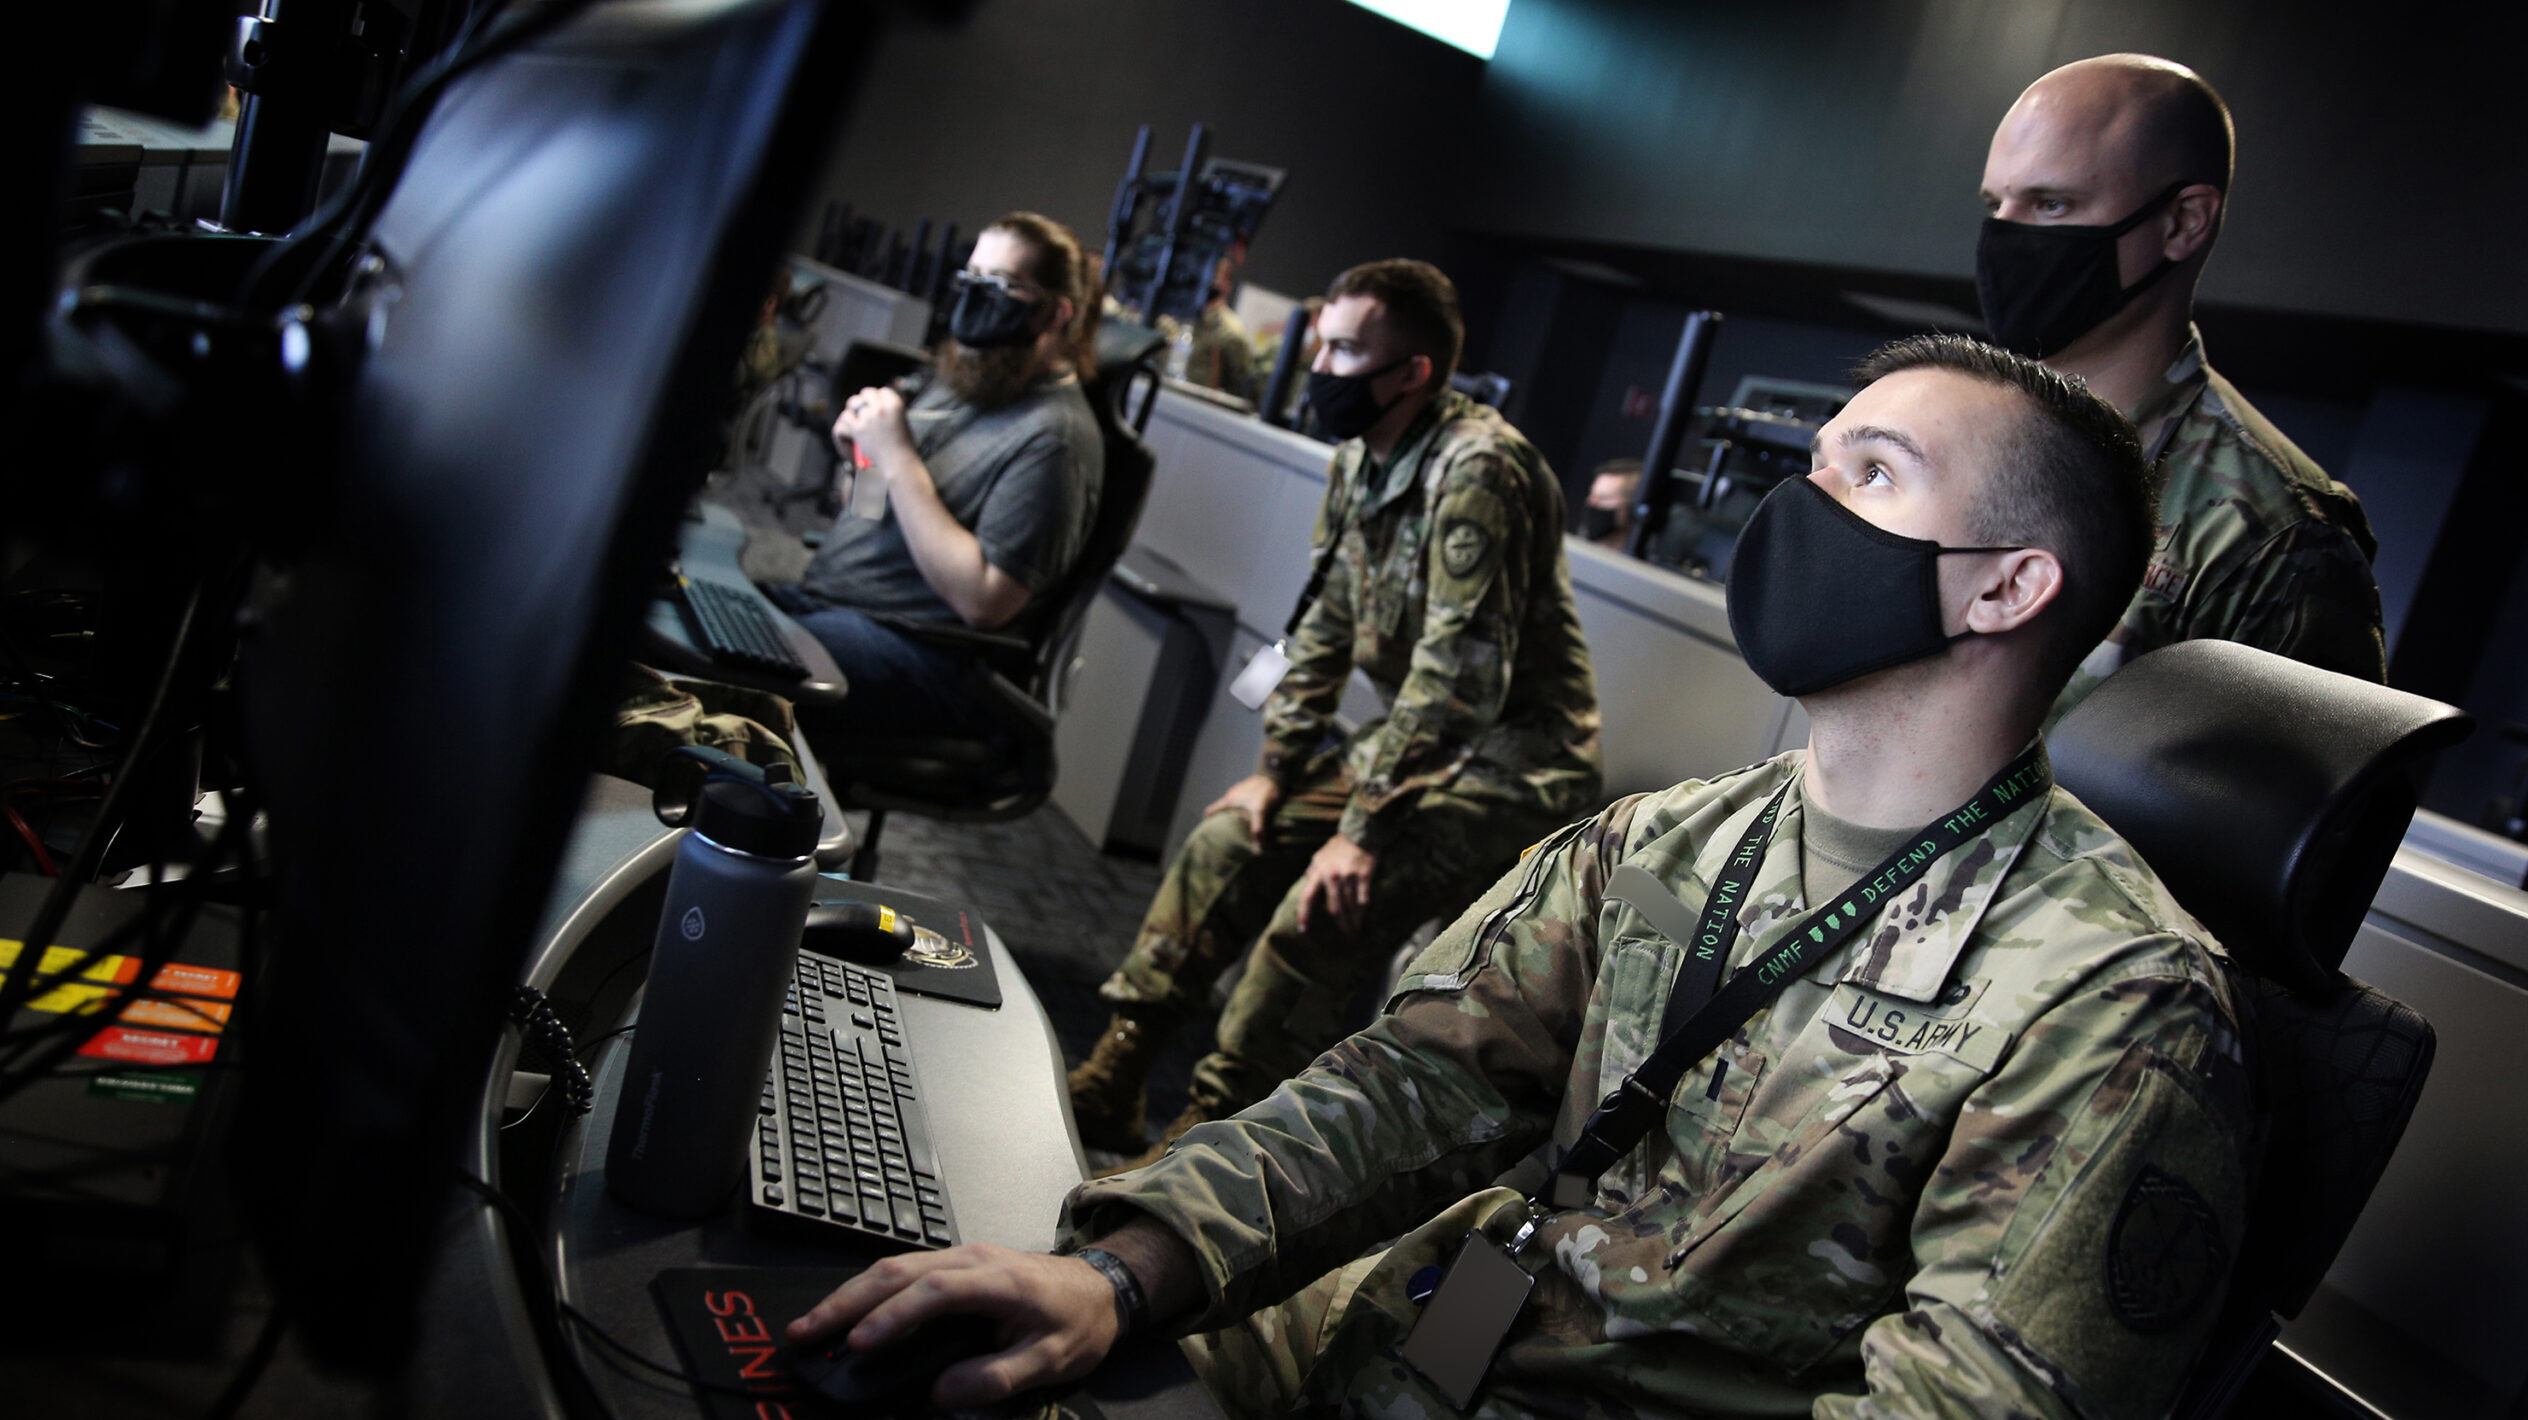 CYBERCOM increasing intel collection in light of Russia-Ukraine conflict